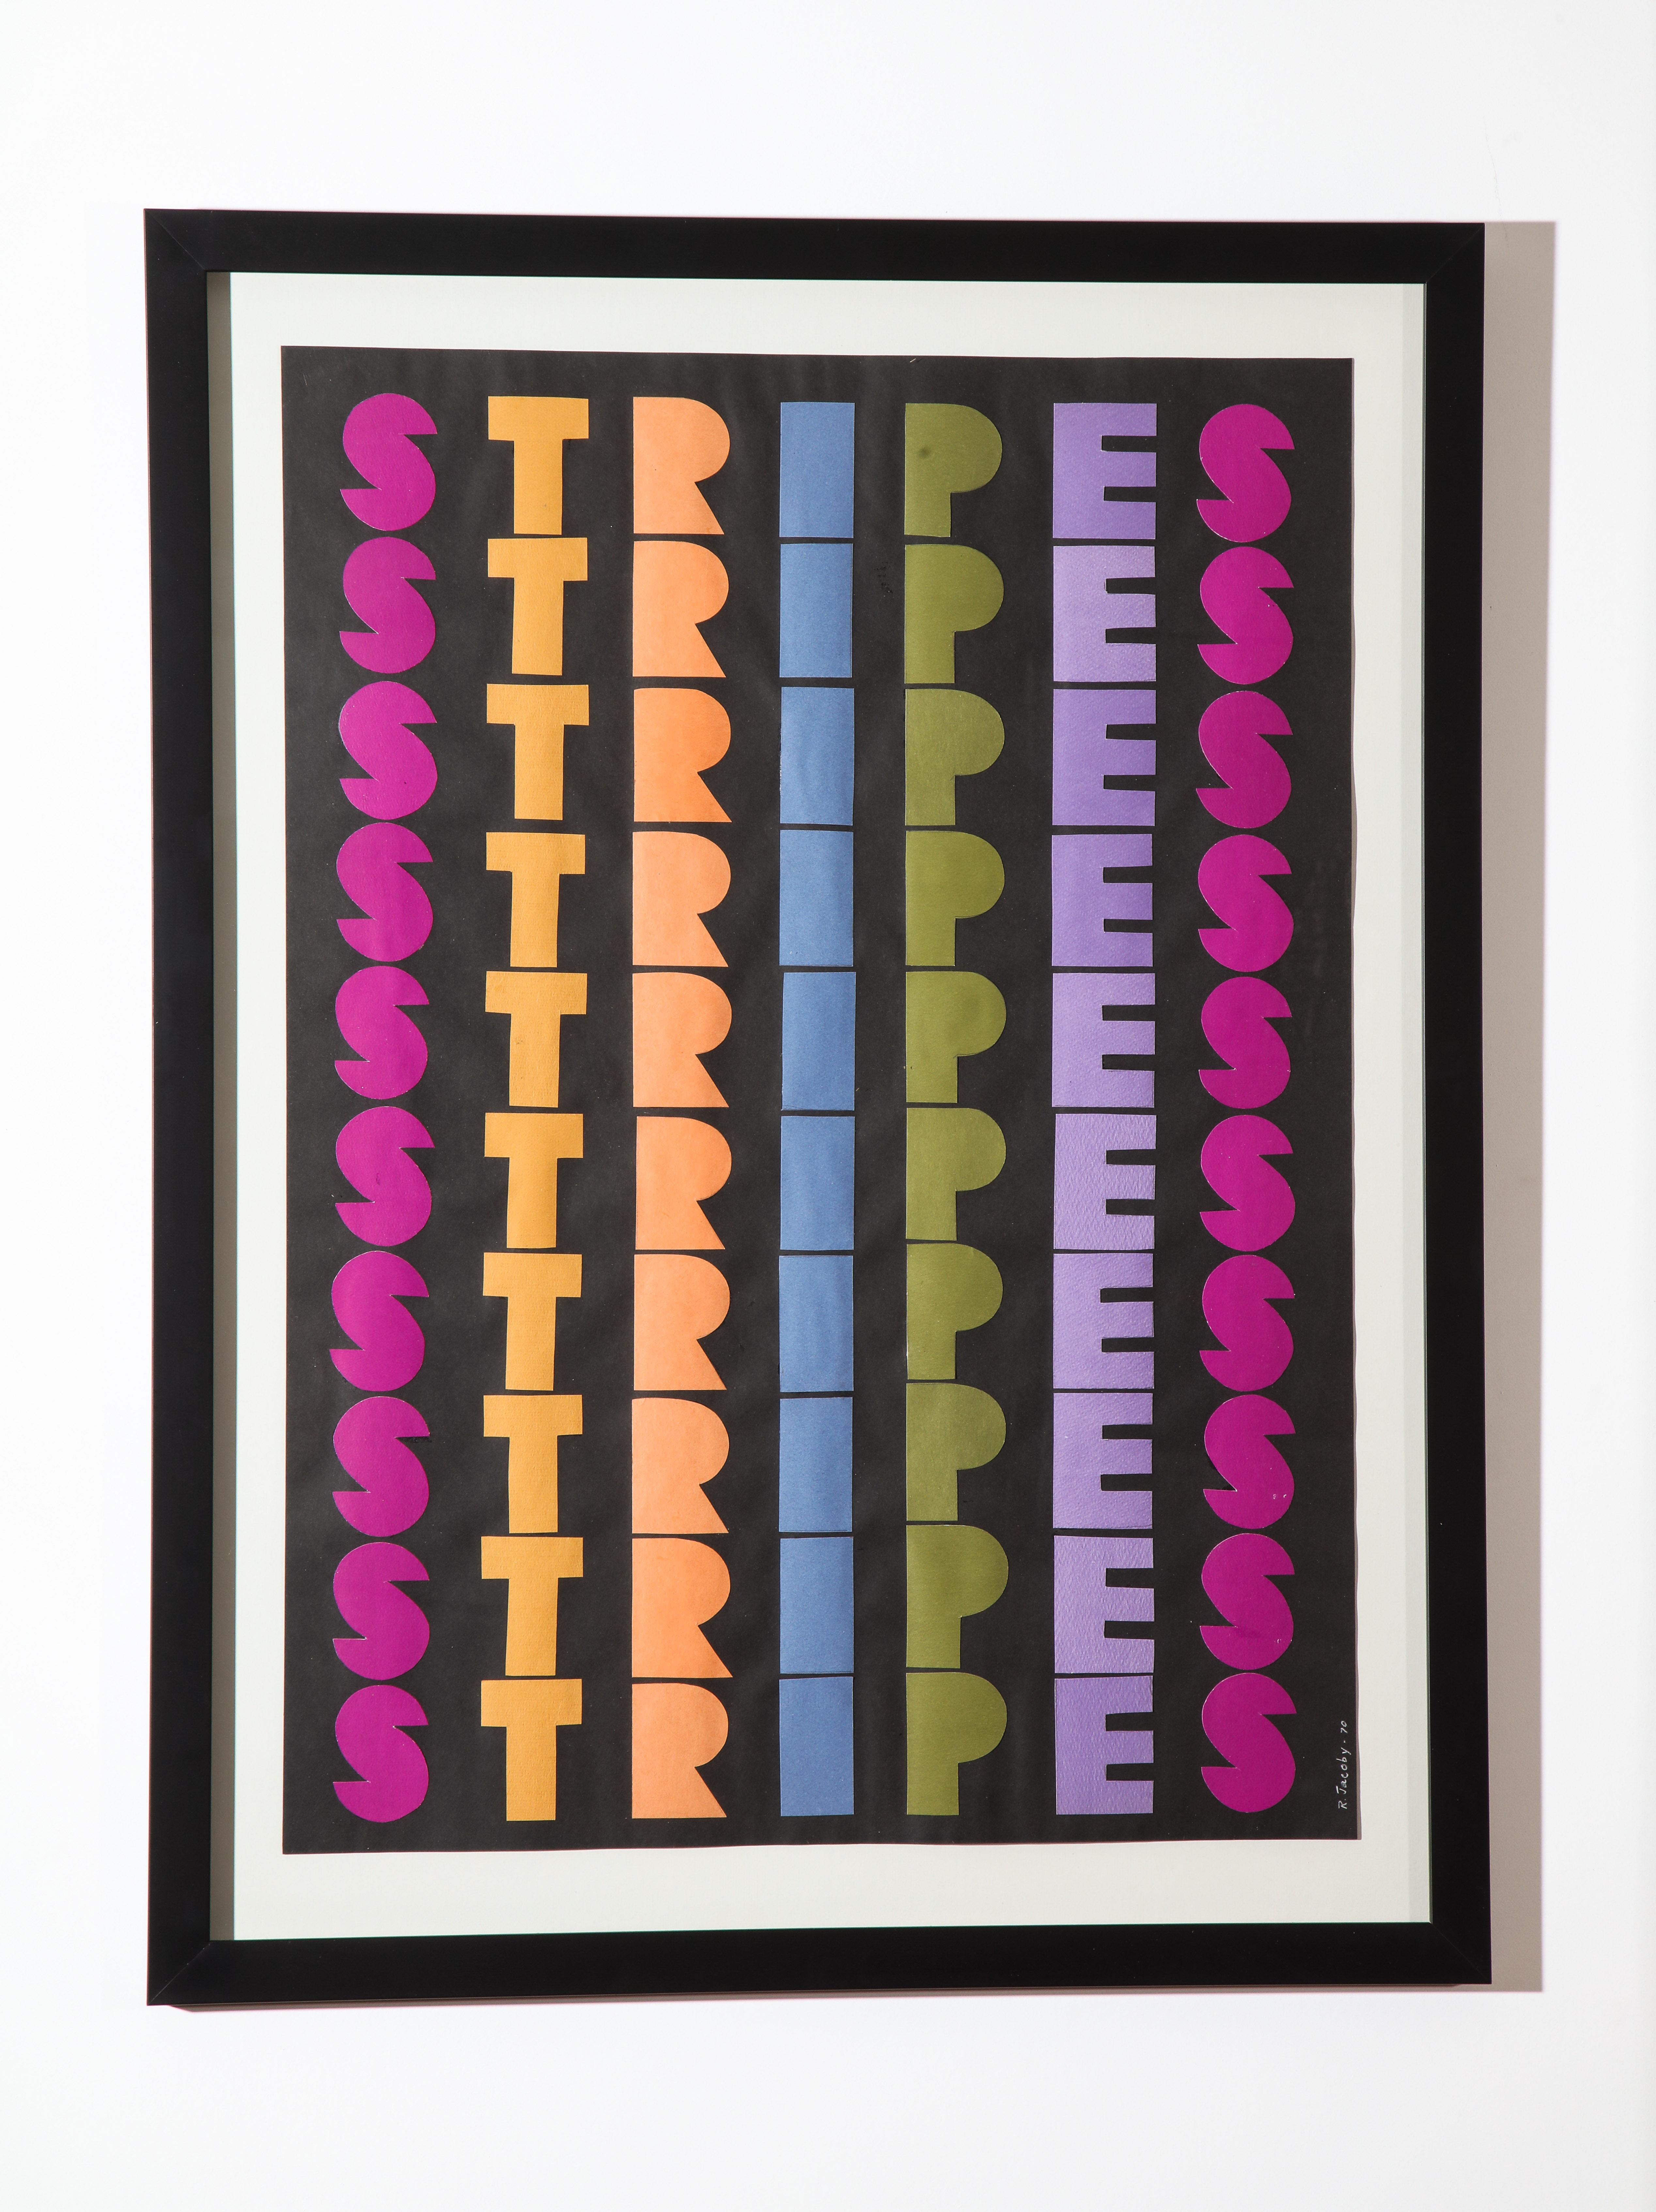 Ruth Jacoby collage stripes signed. Ruth Jacoby New York visual poet: 1903-1993. Collage on cardstock with handcut stencilled letters. Signed R. Jacoby 1970 lower right edge. Newly reframed with UV plexiglass and black matte wood molding. Image size